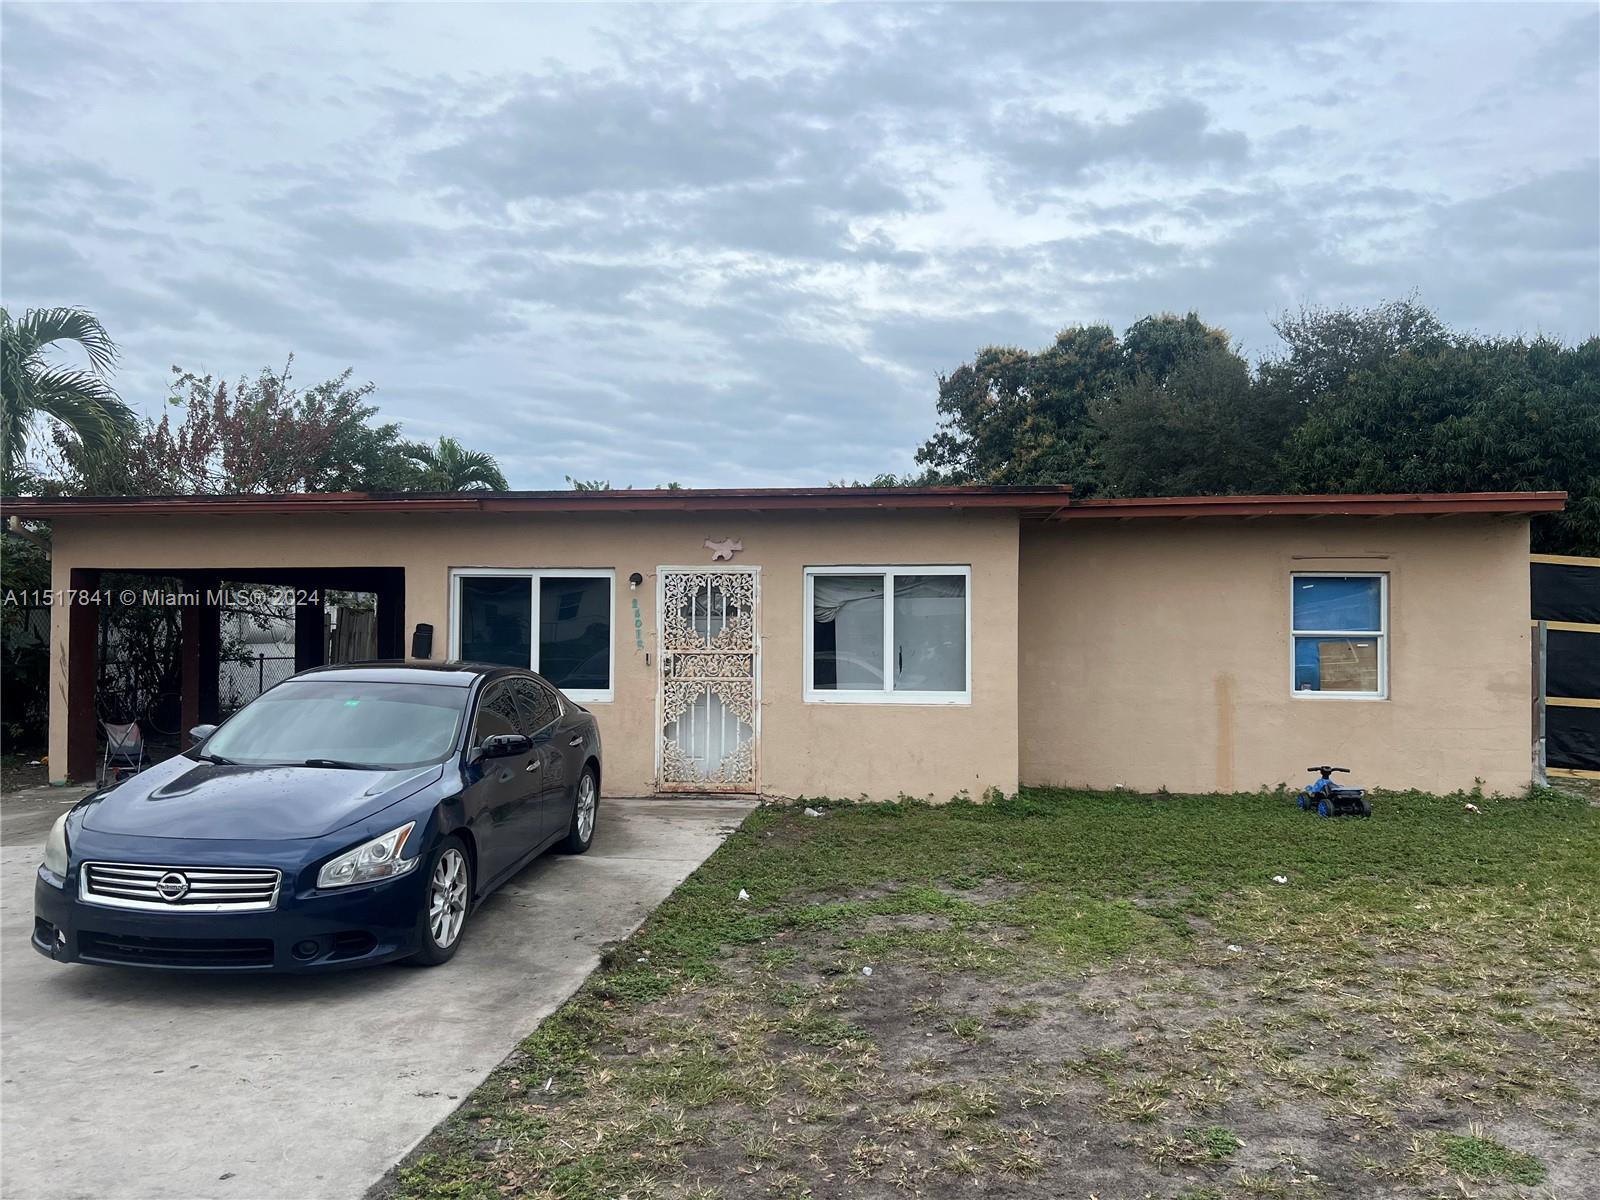 Photo of 16015 NW 22nd Ave in Miami Gardens, FL